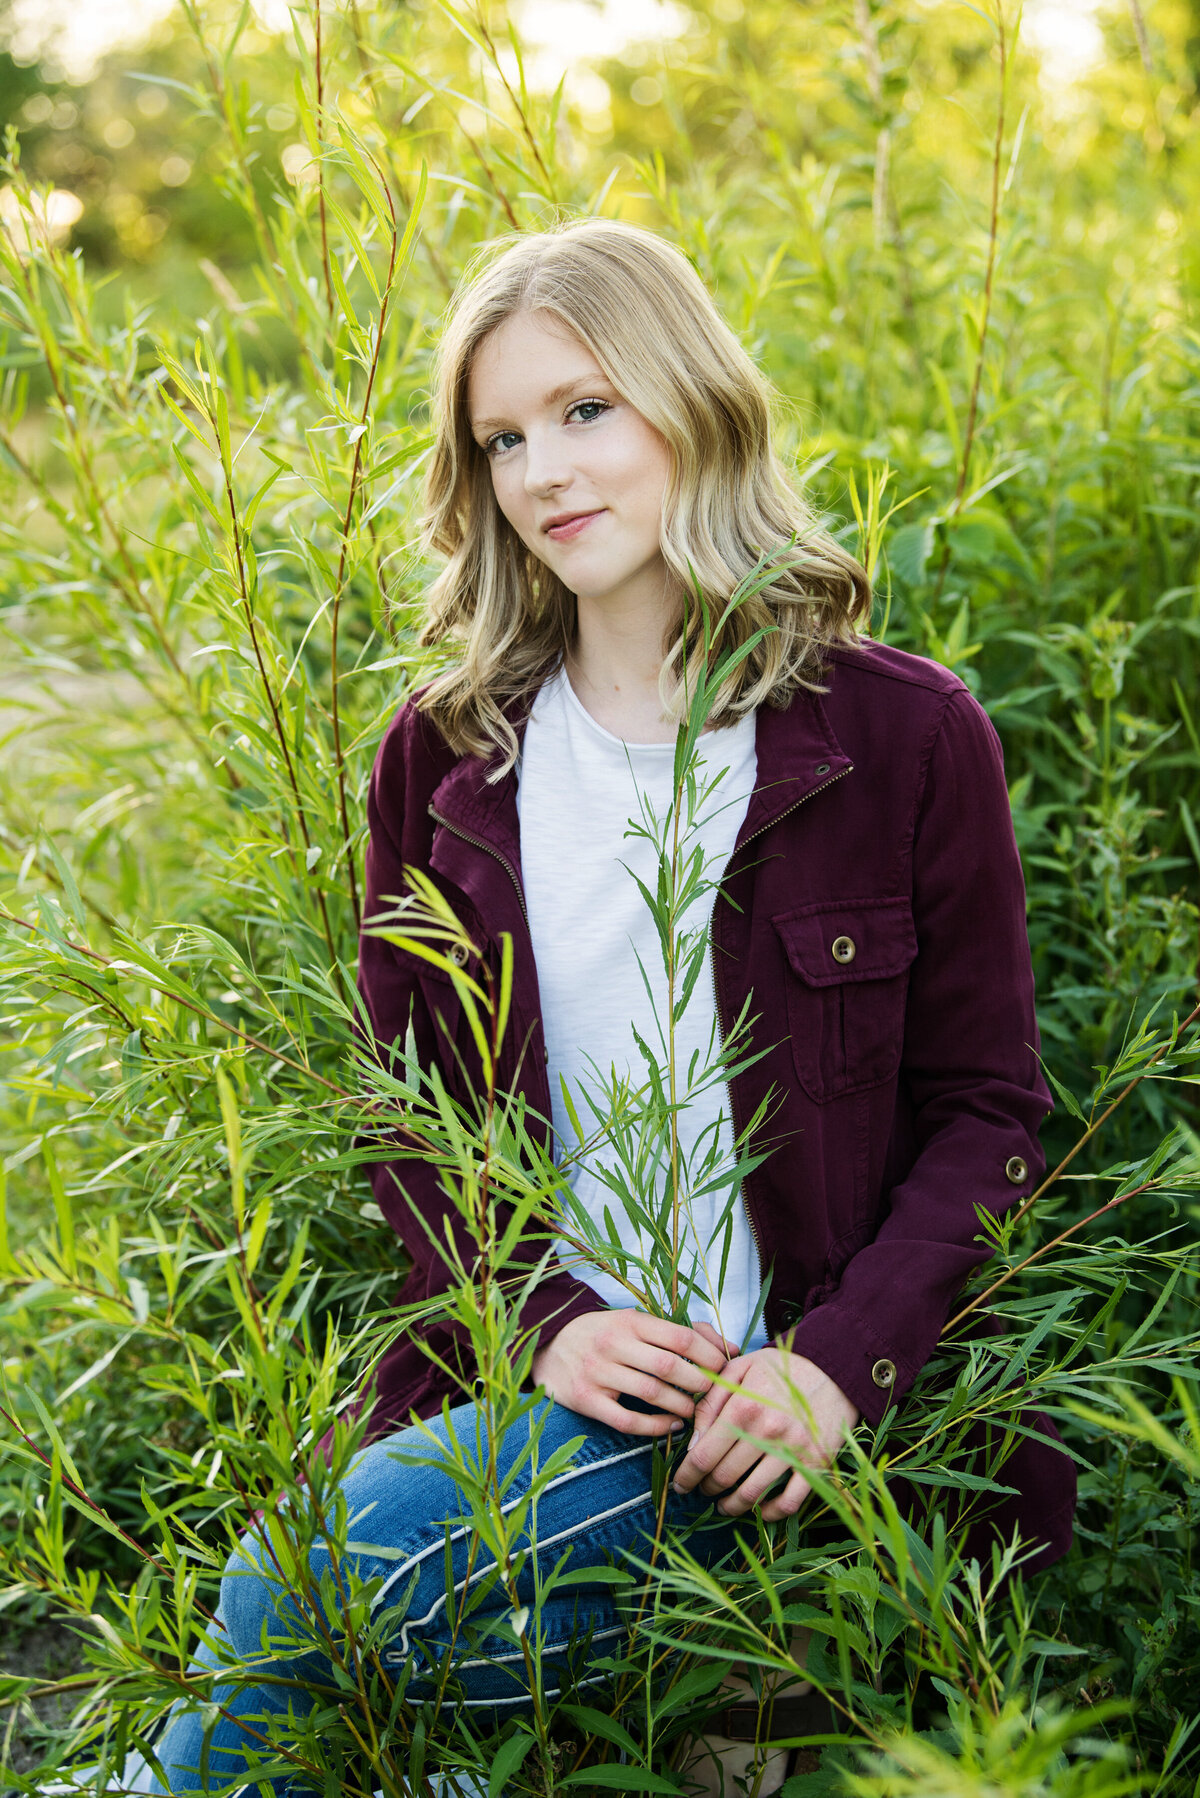 grad photo of girl with green willow branches wearing maroon jacket